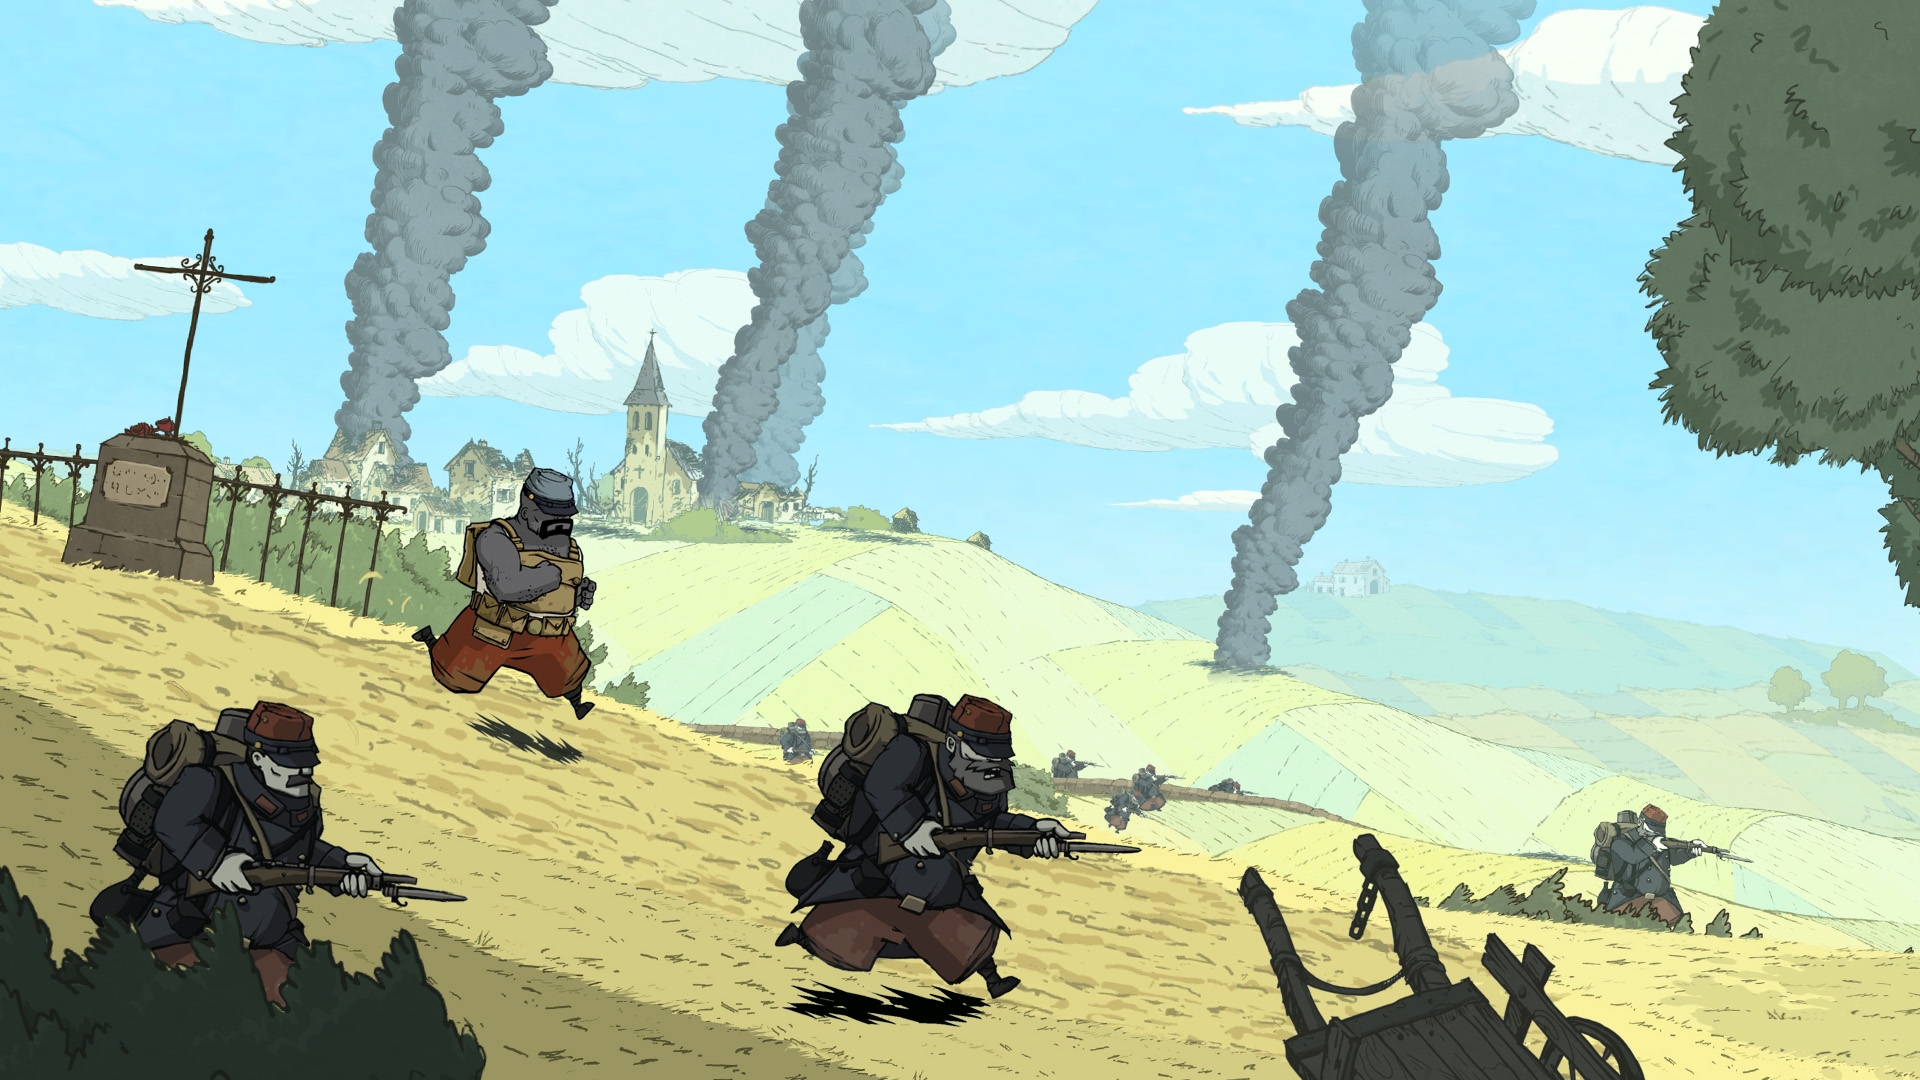 Best war games - Valiant Hearts. Image shows soldiers running down a hill with various fires in the background, and a flaming church.